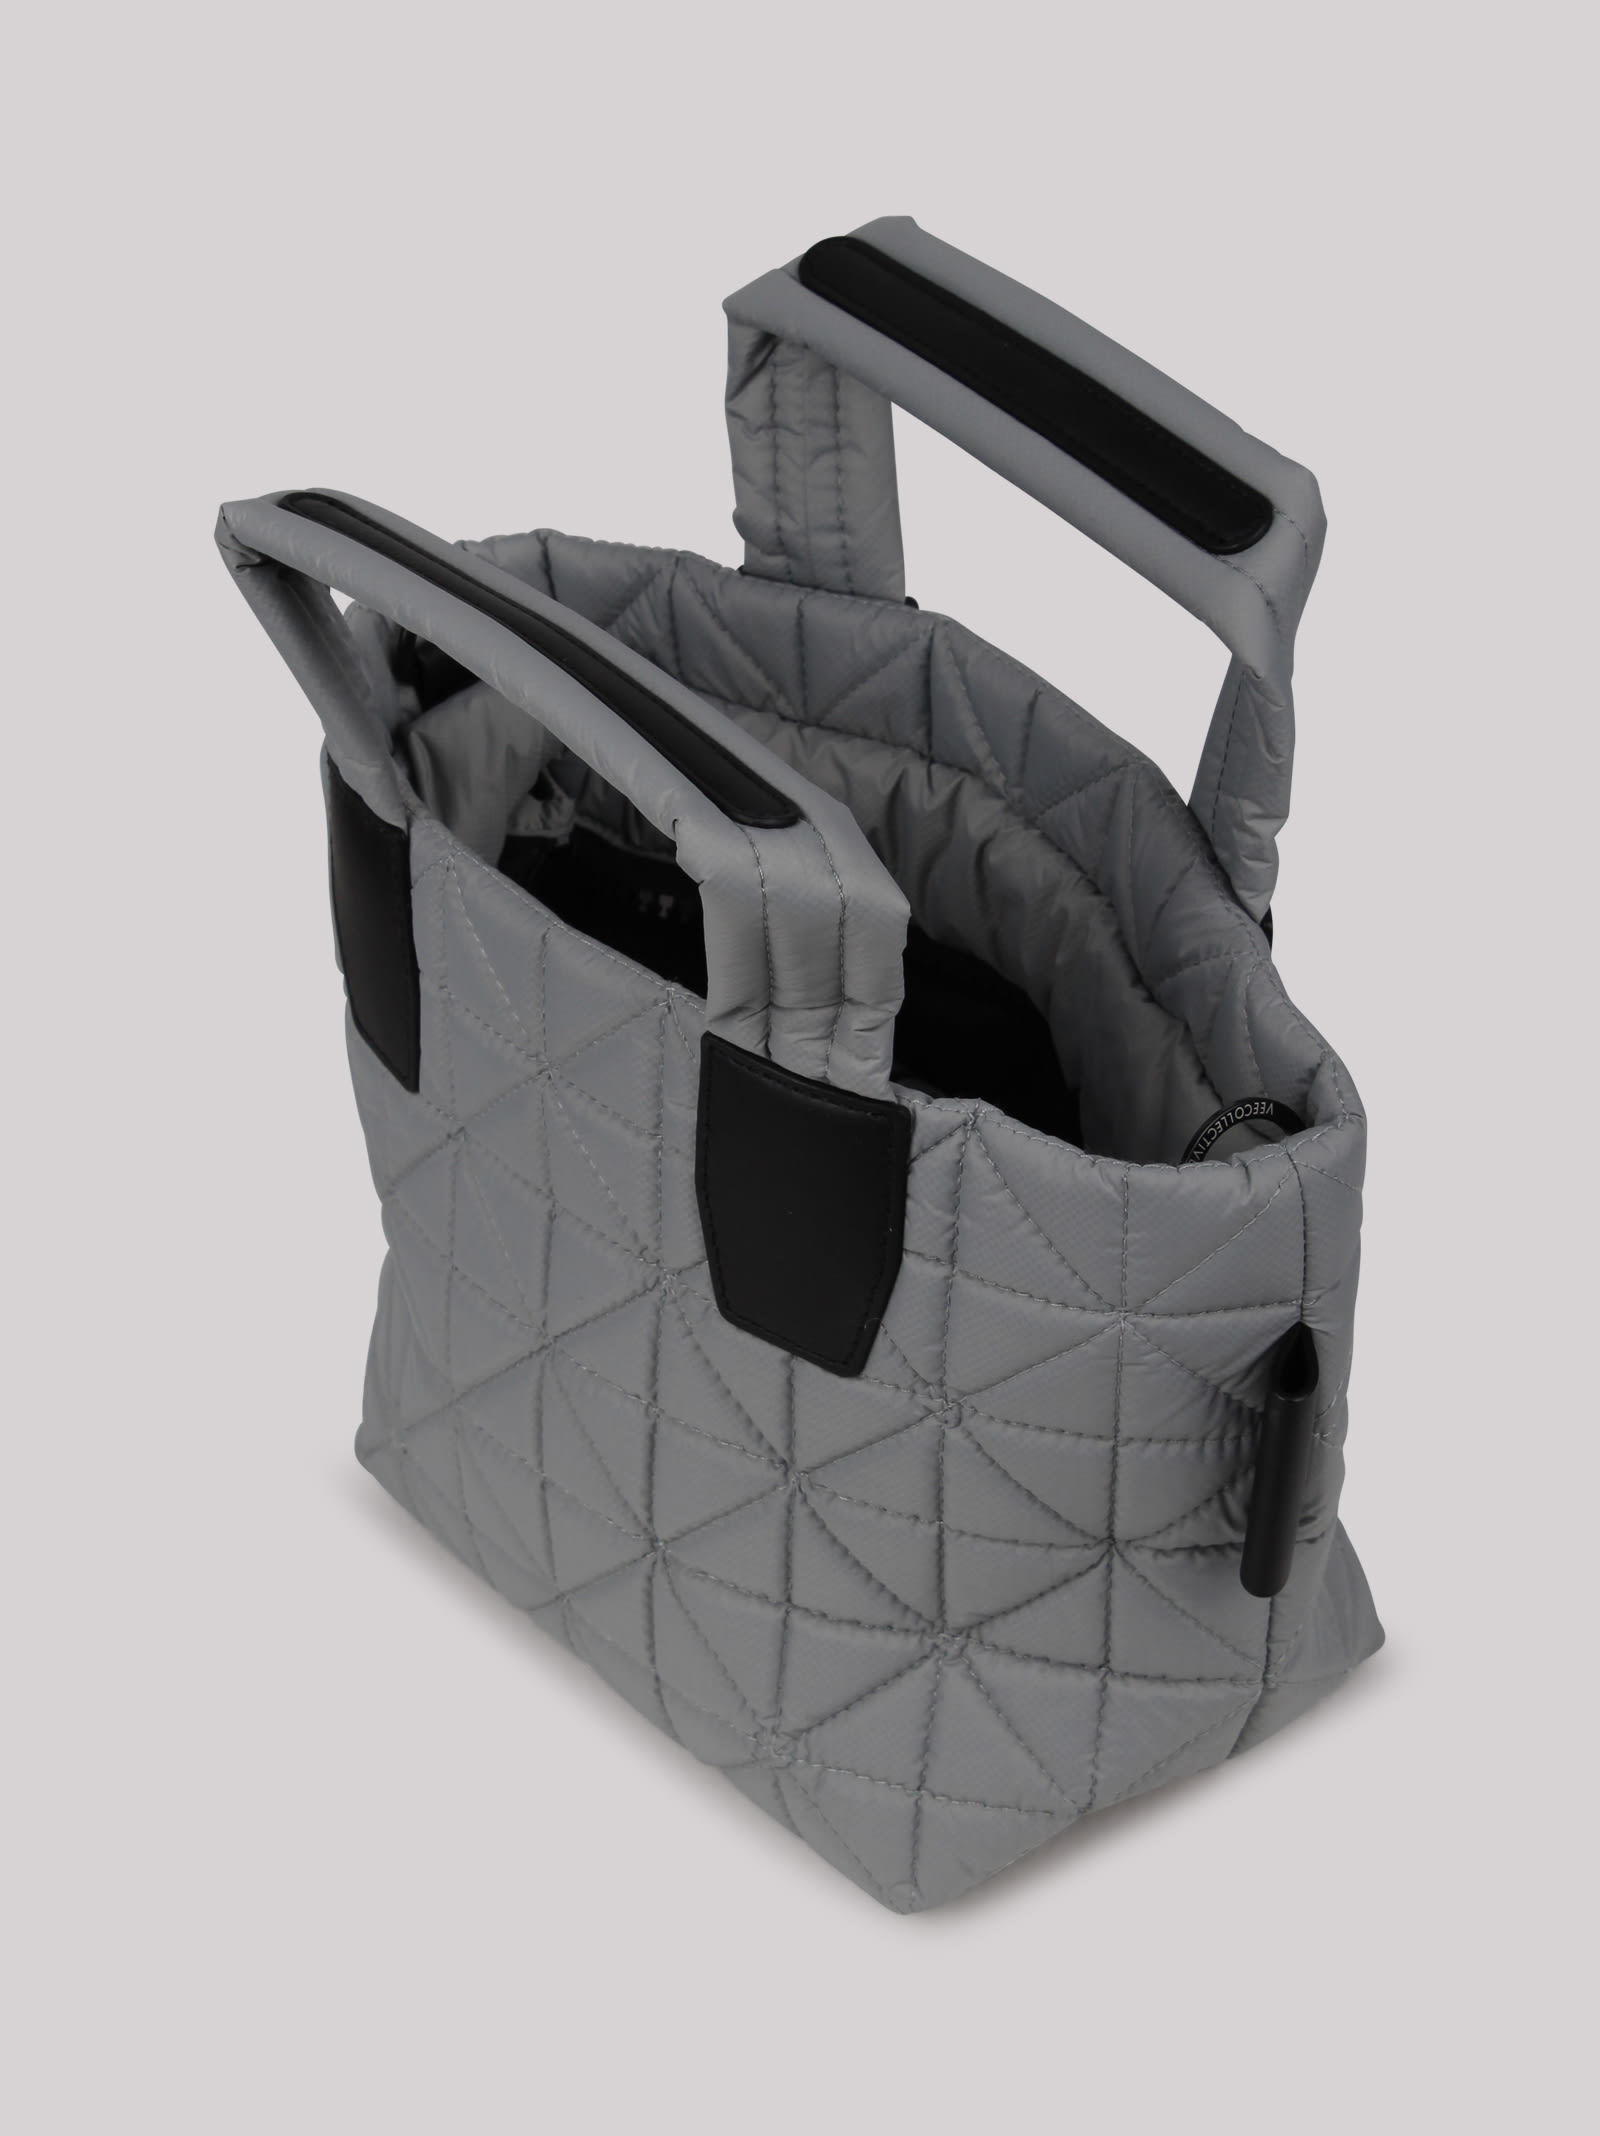 Shop Veecollective Vee Collective Small Vee Padded Tote Bag